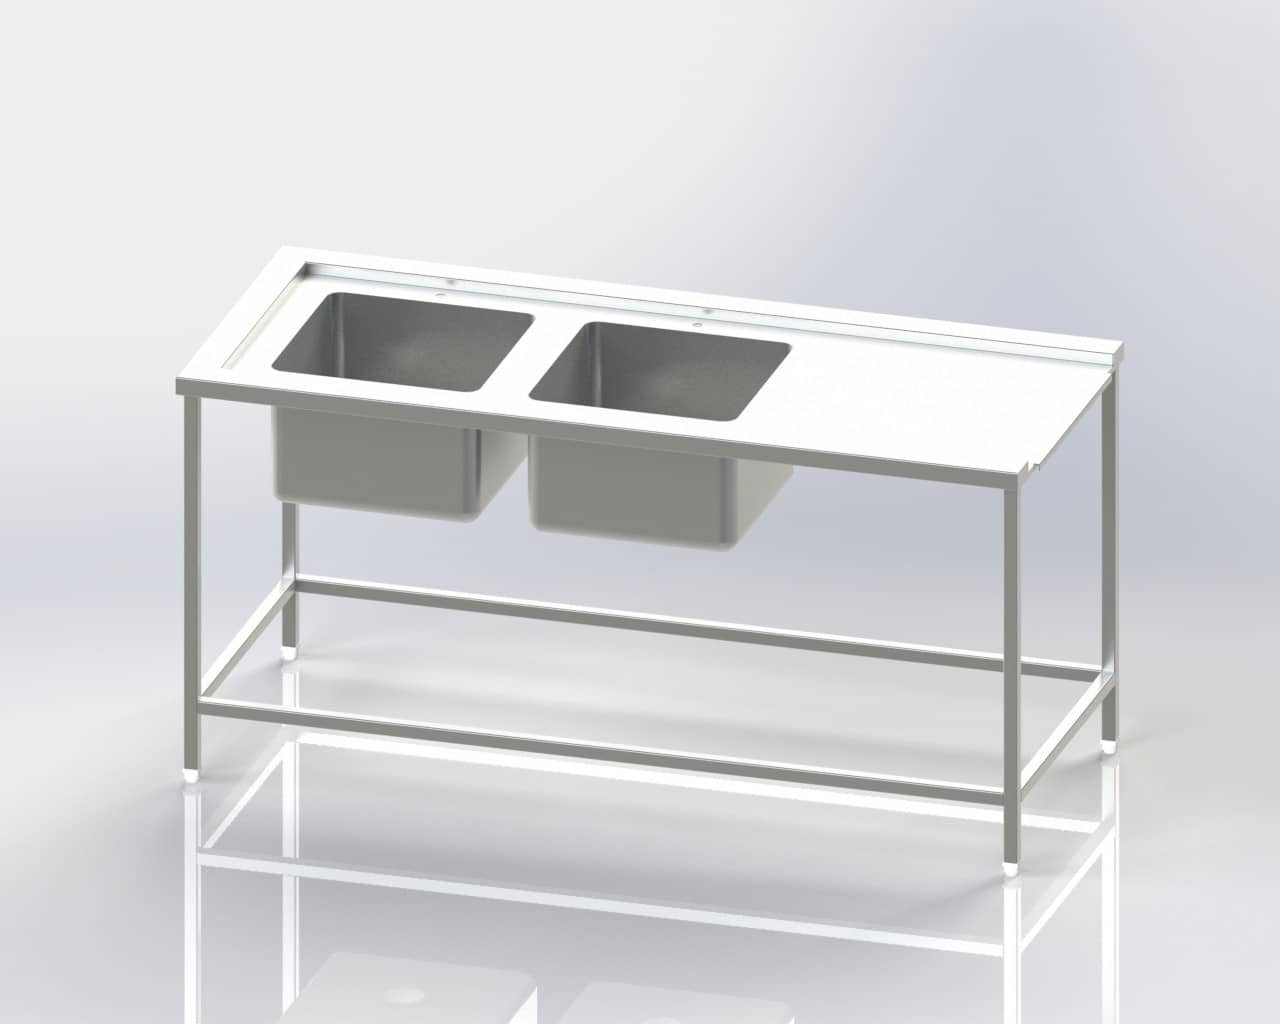 Two Sink - Dishwasher Inlet Table